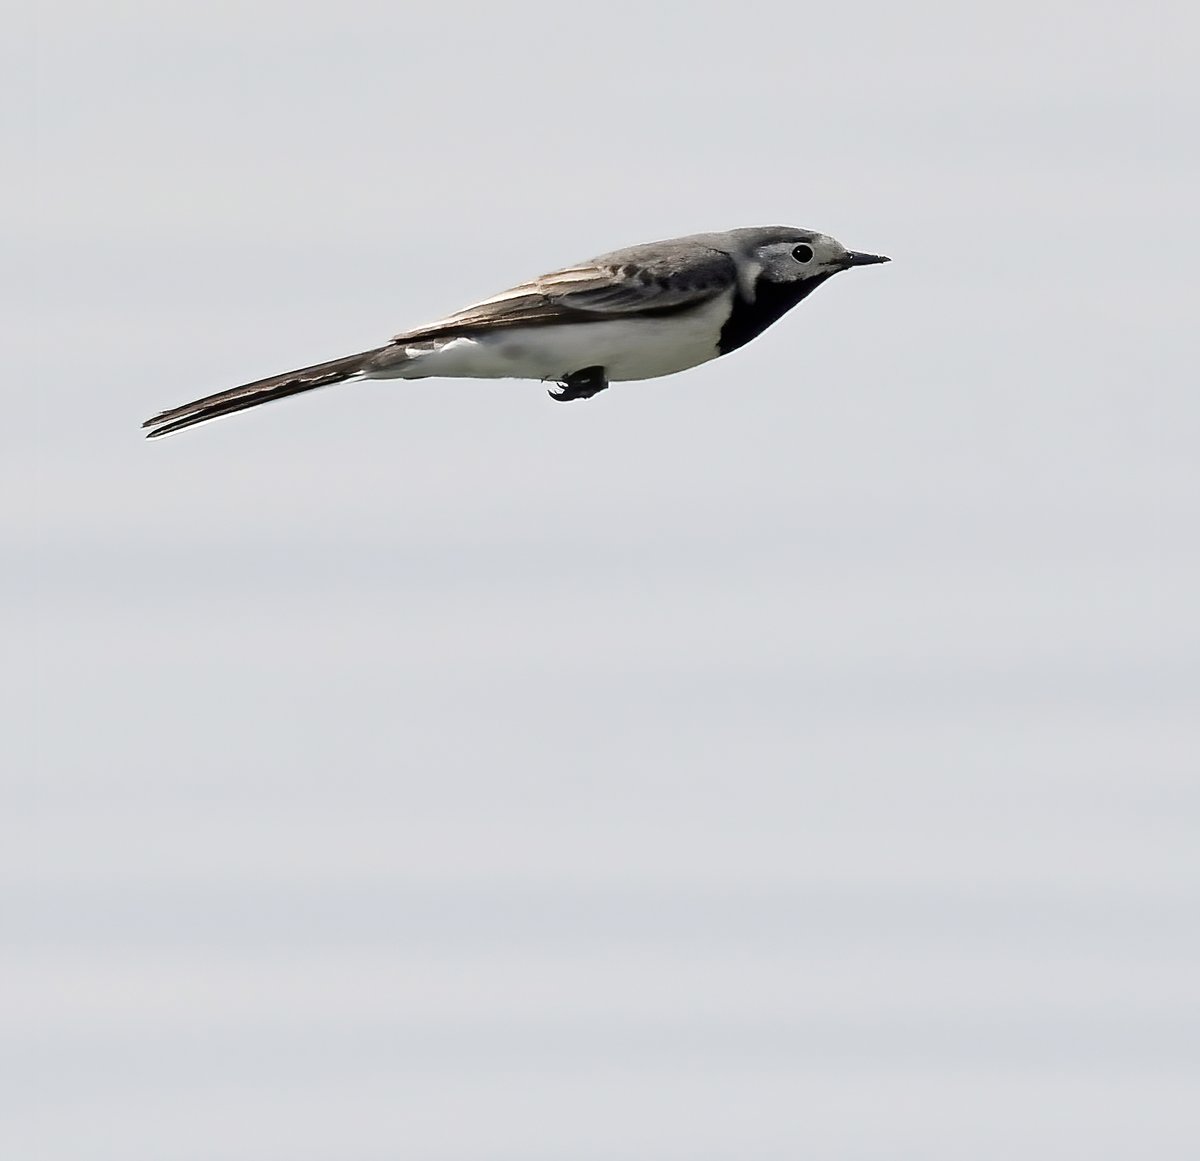 Yesterday, this Pied Wagtail was thrown at me from Cheddar reservoir!  I suspect my attackers had frog suits on, and disappeared back under the water after launching this poor innocent bird in my direction.... 